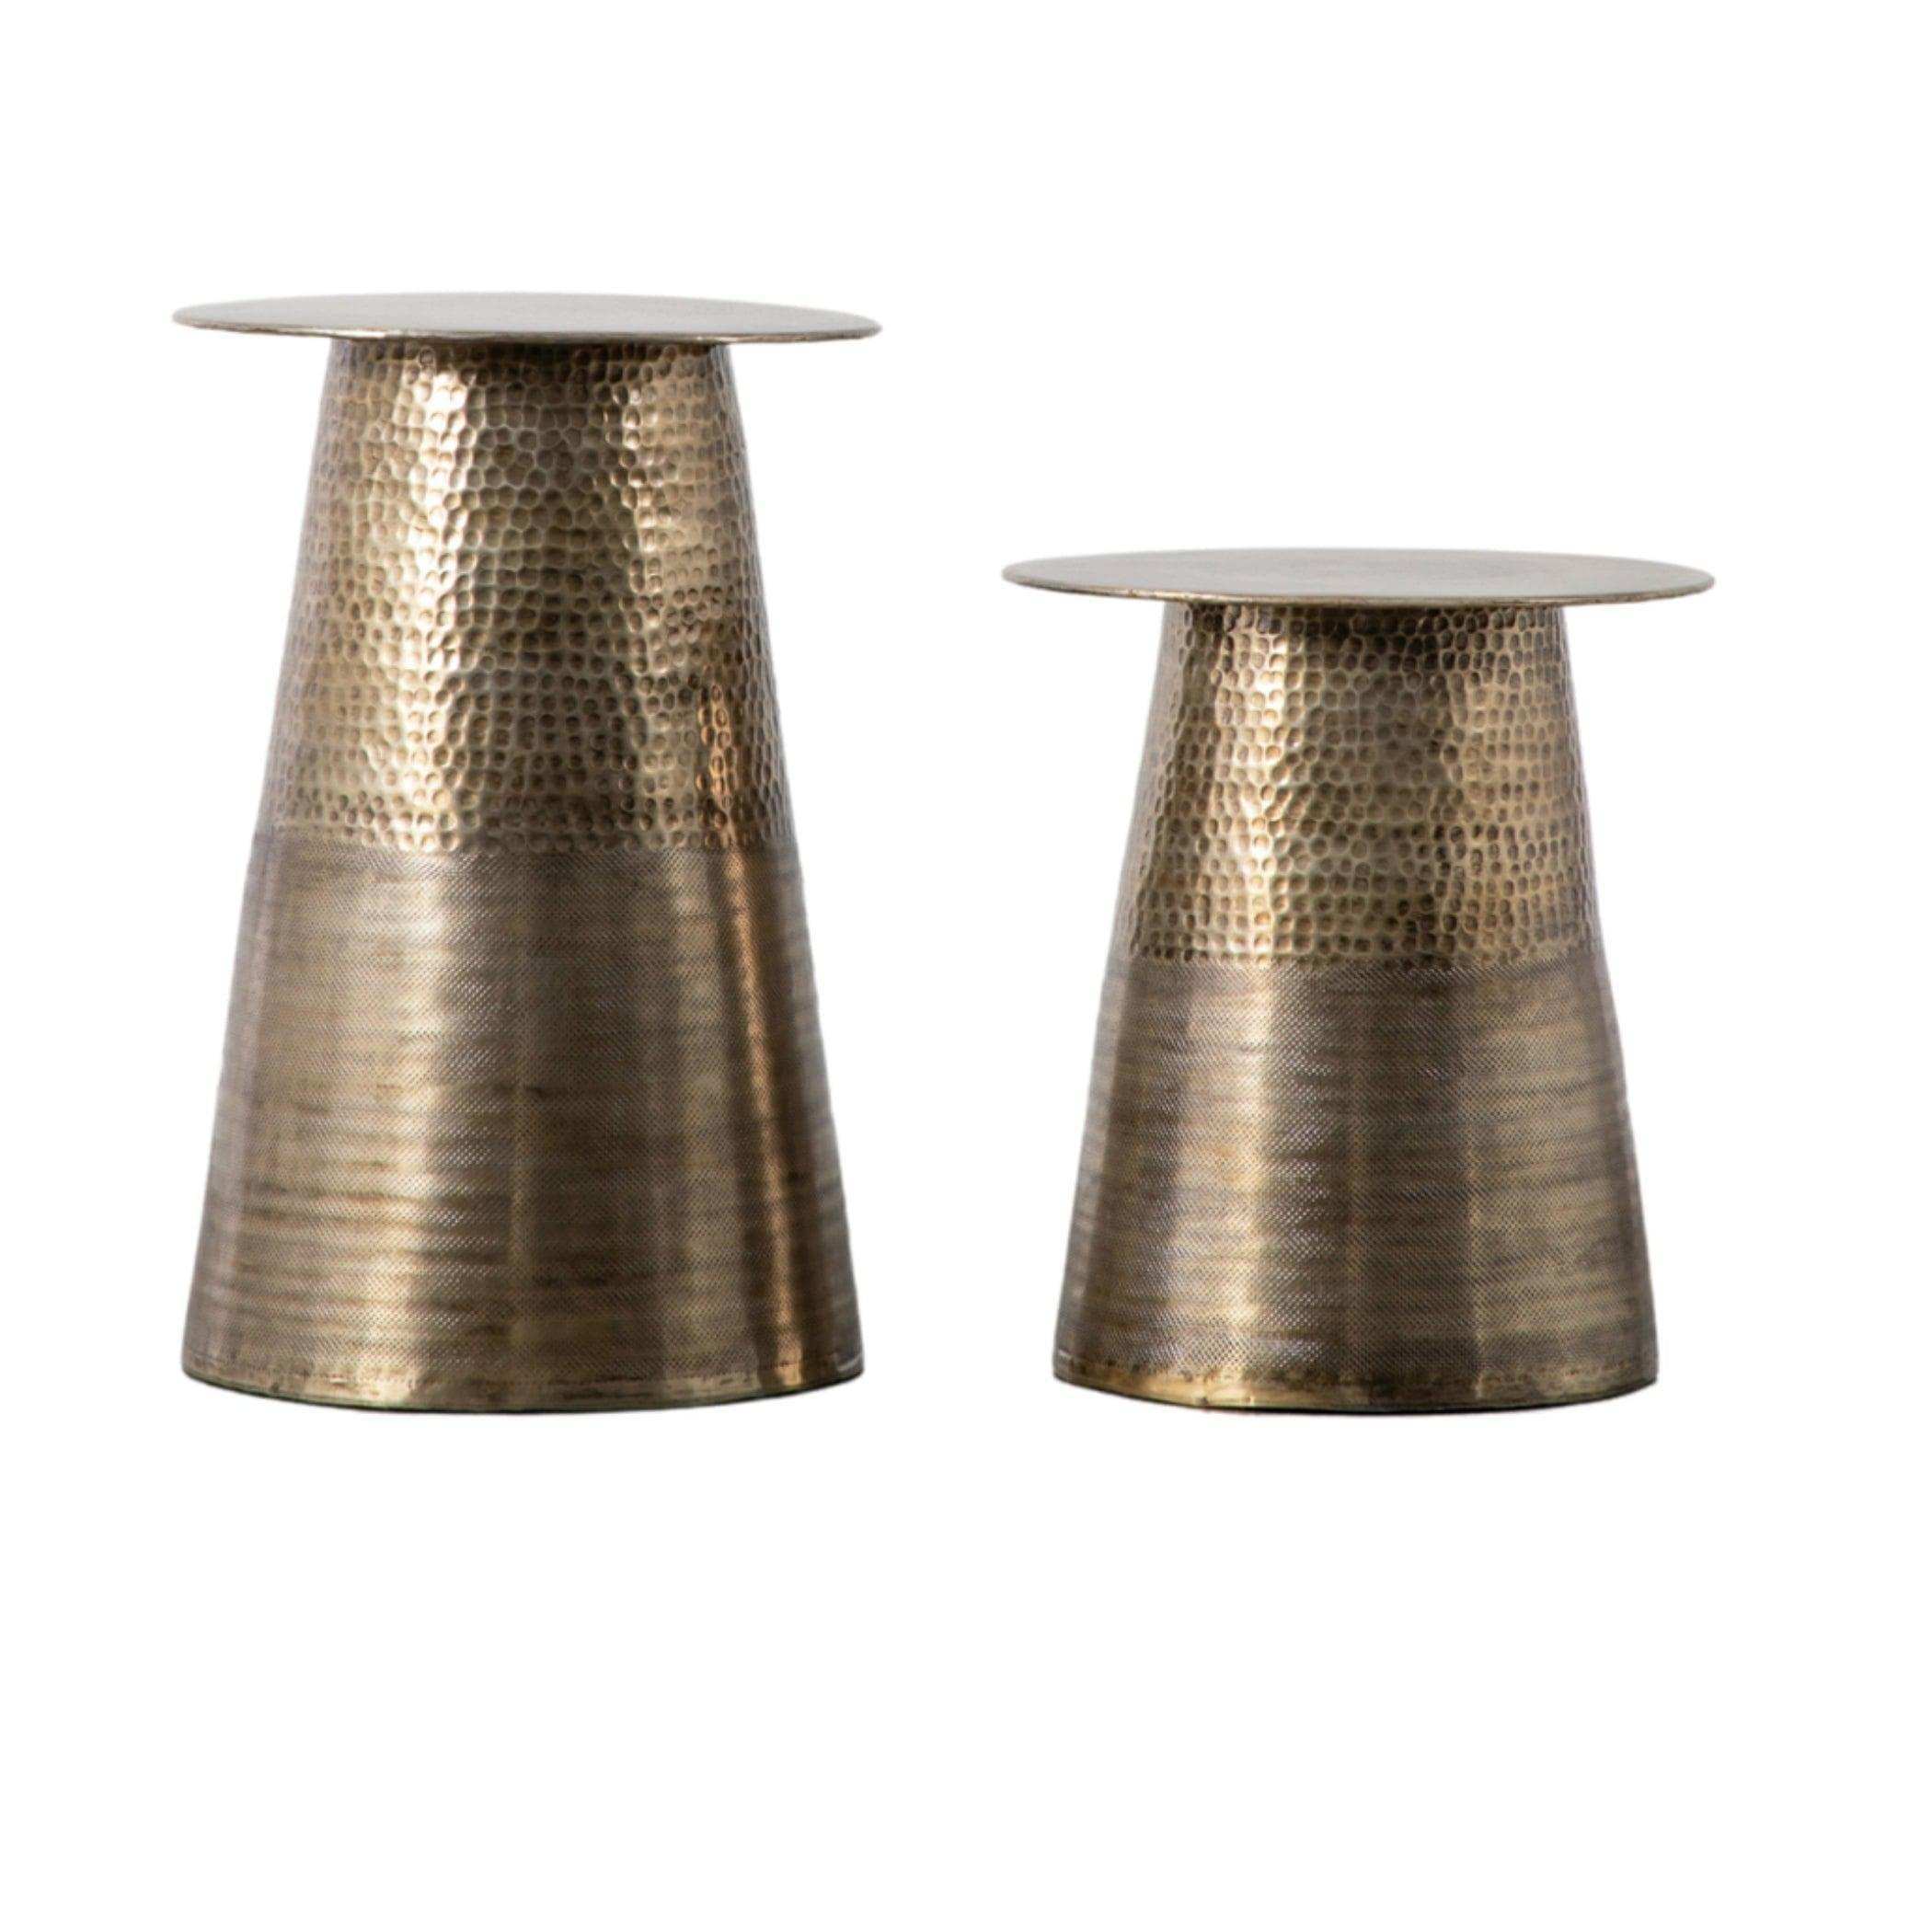 Hammered Texture Double Table Set of 2 Tables - The Farthing